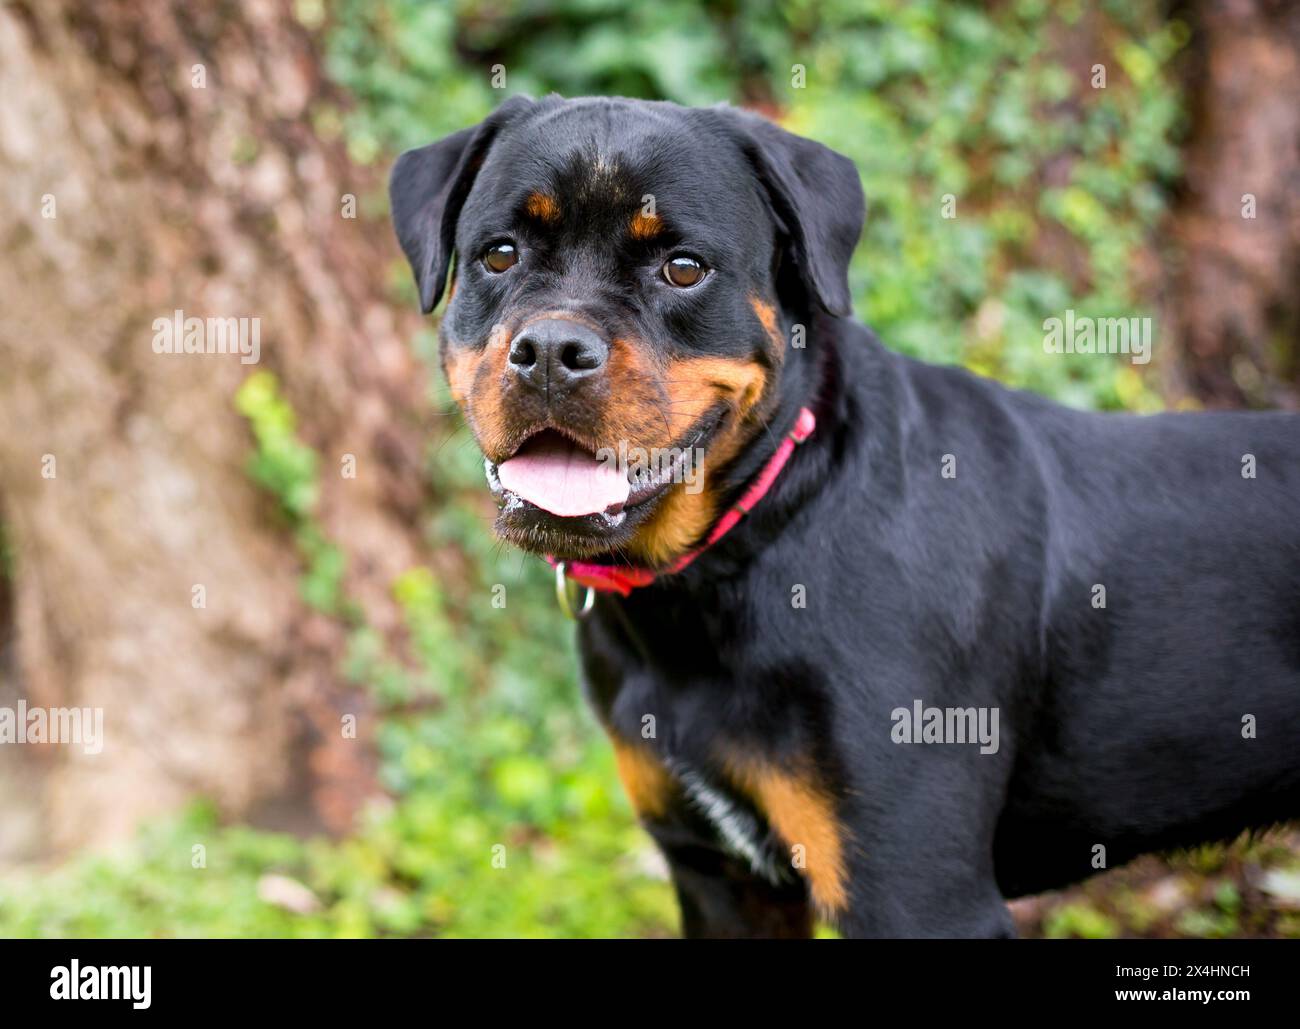 A friendly purebred Rottweiler dog with a happy expression Stock Photo